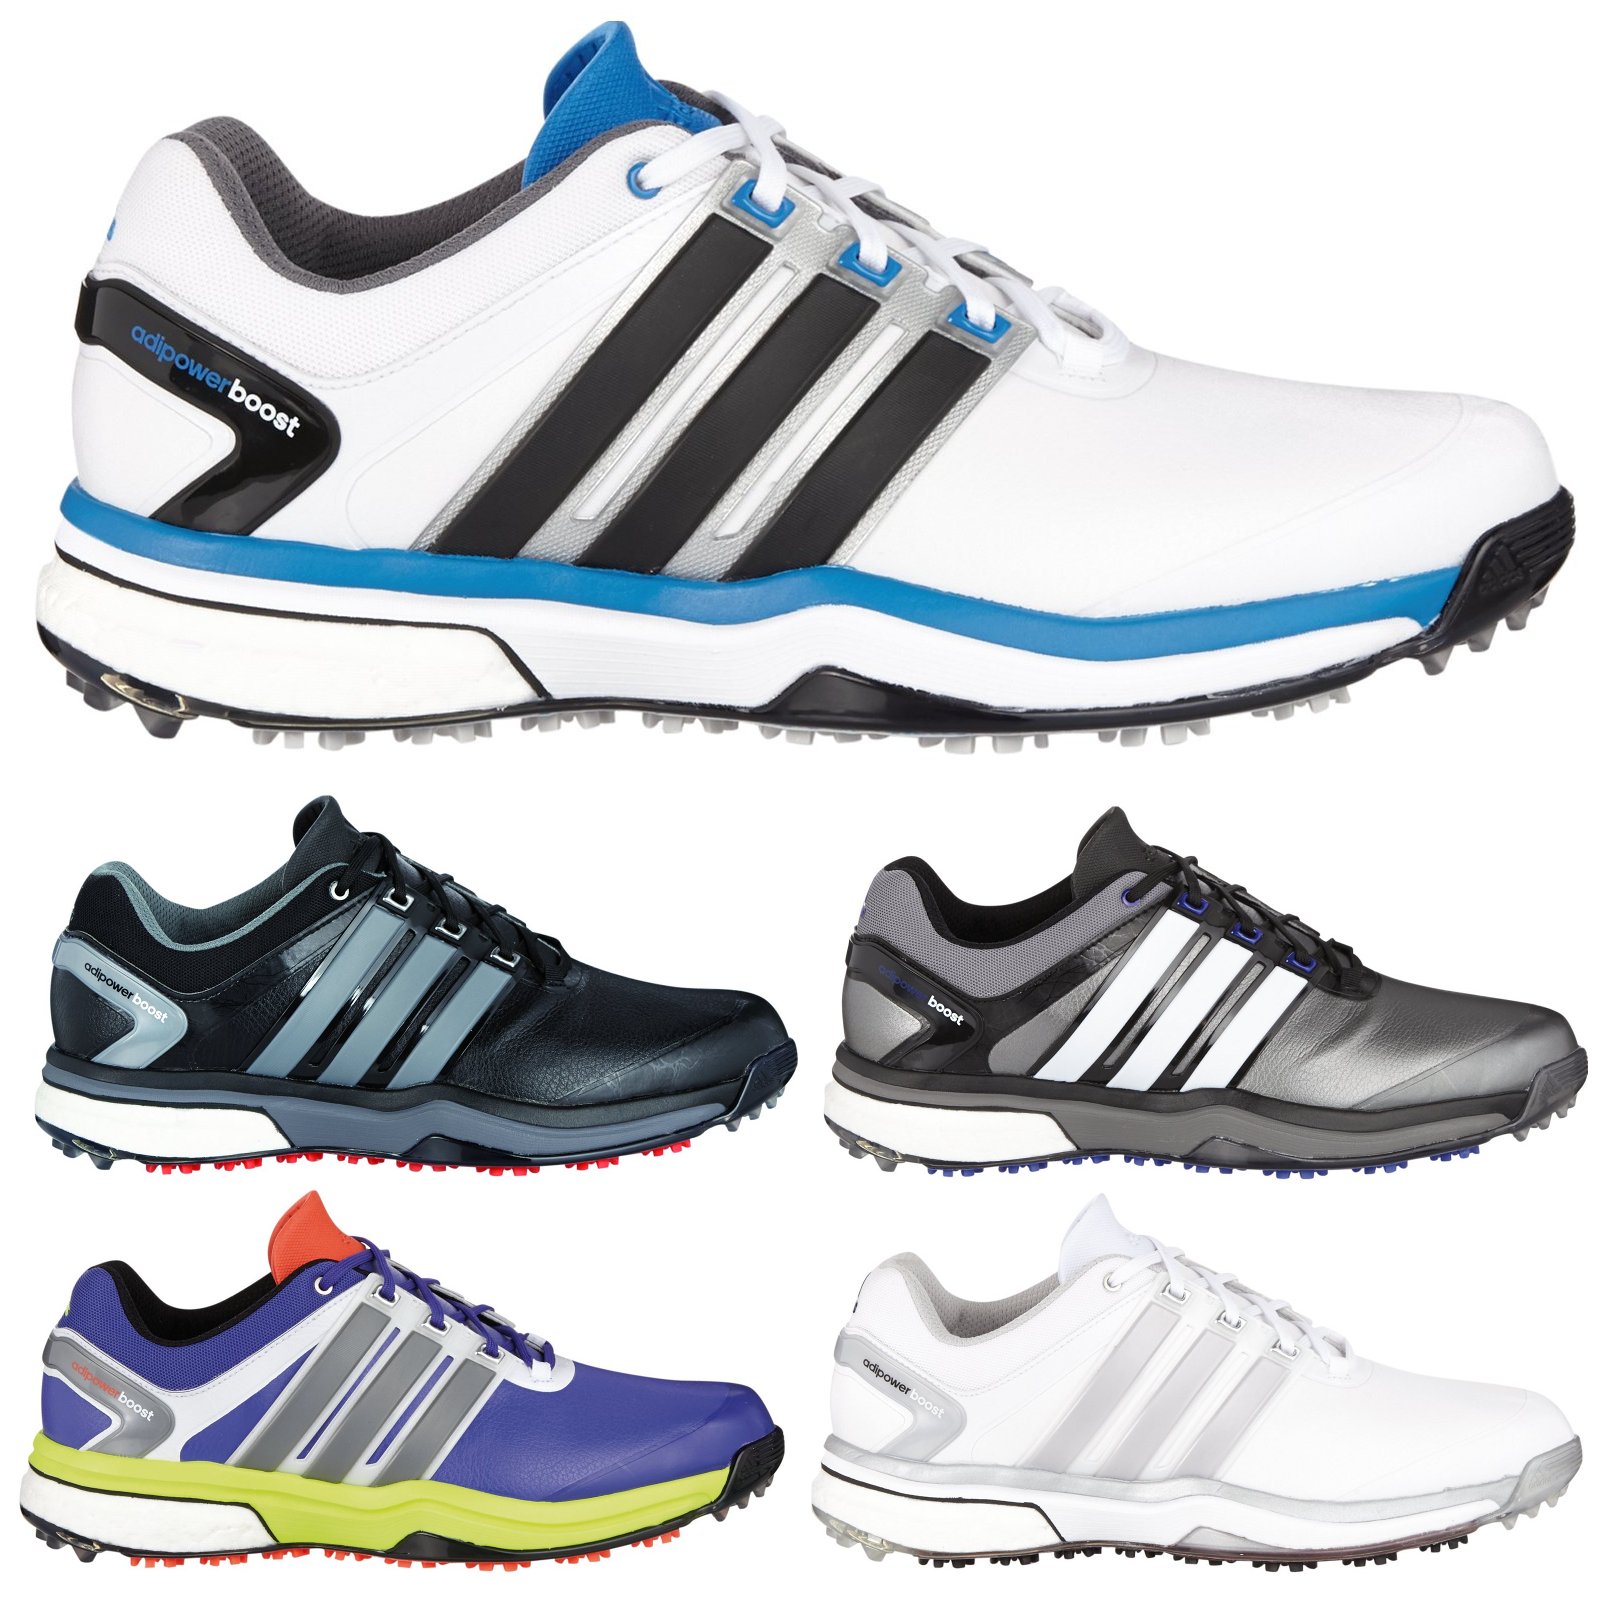 adipower boost golf shoes